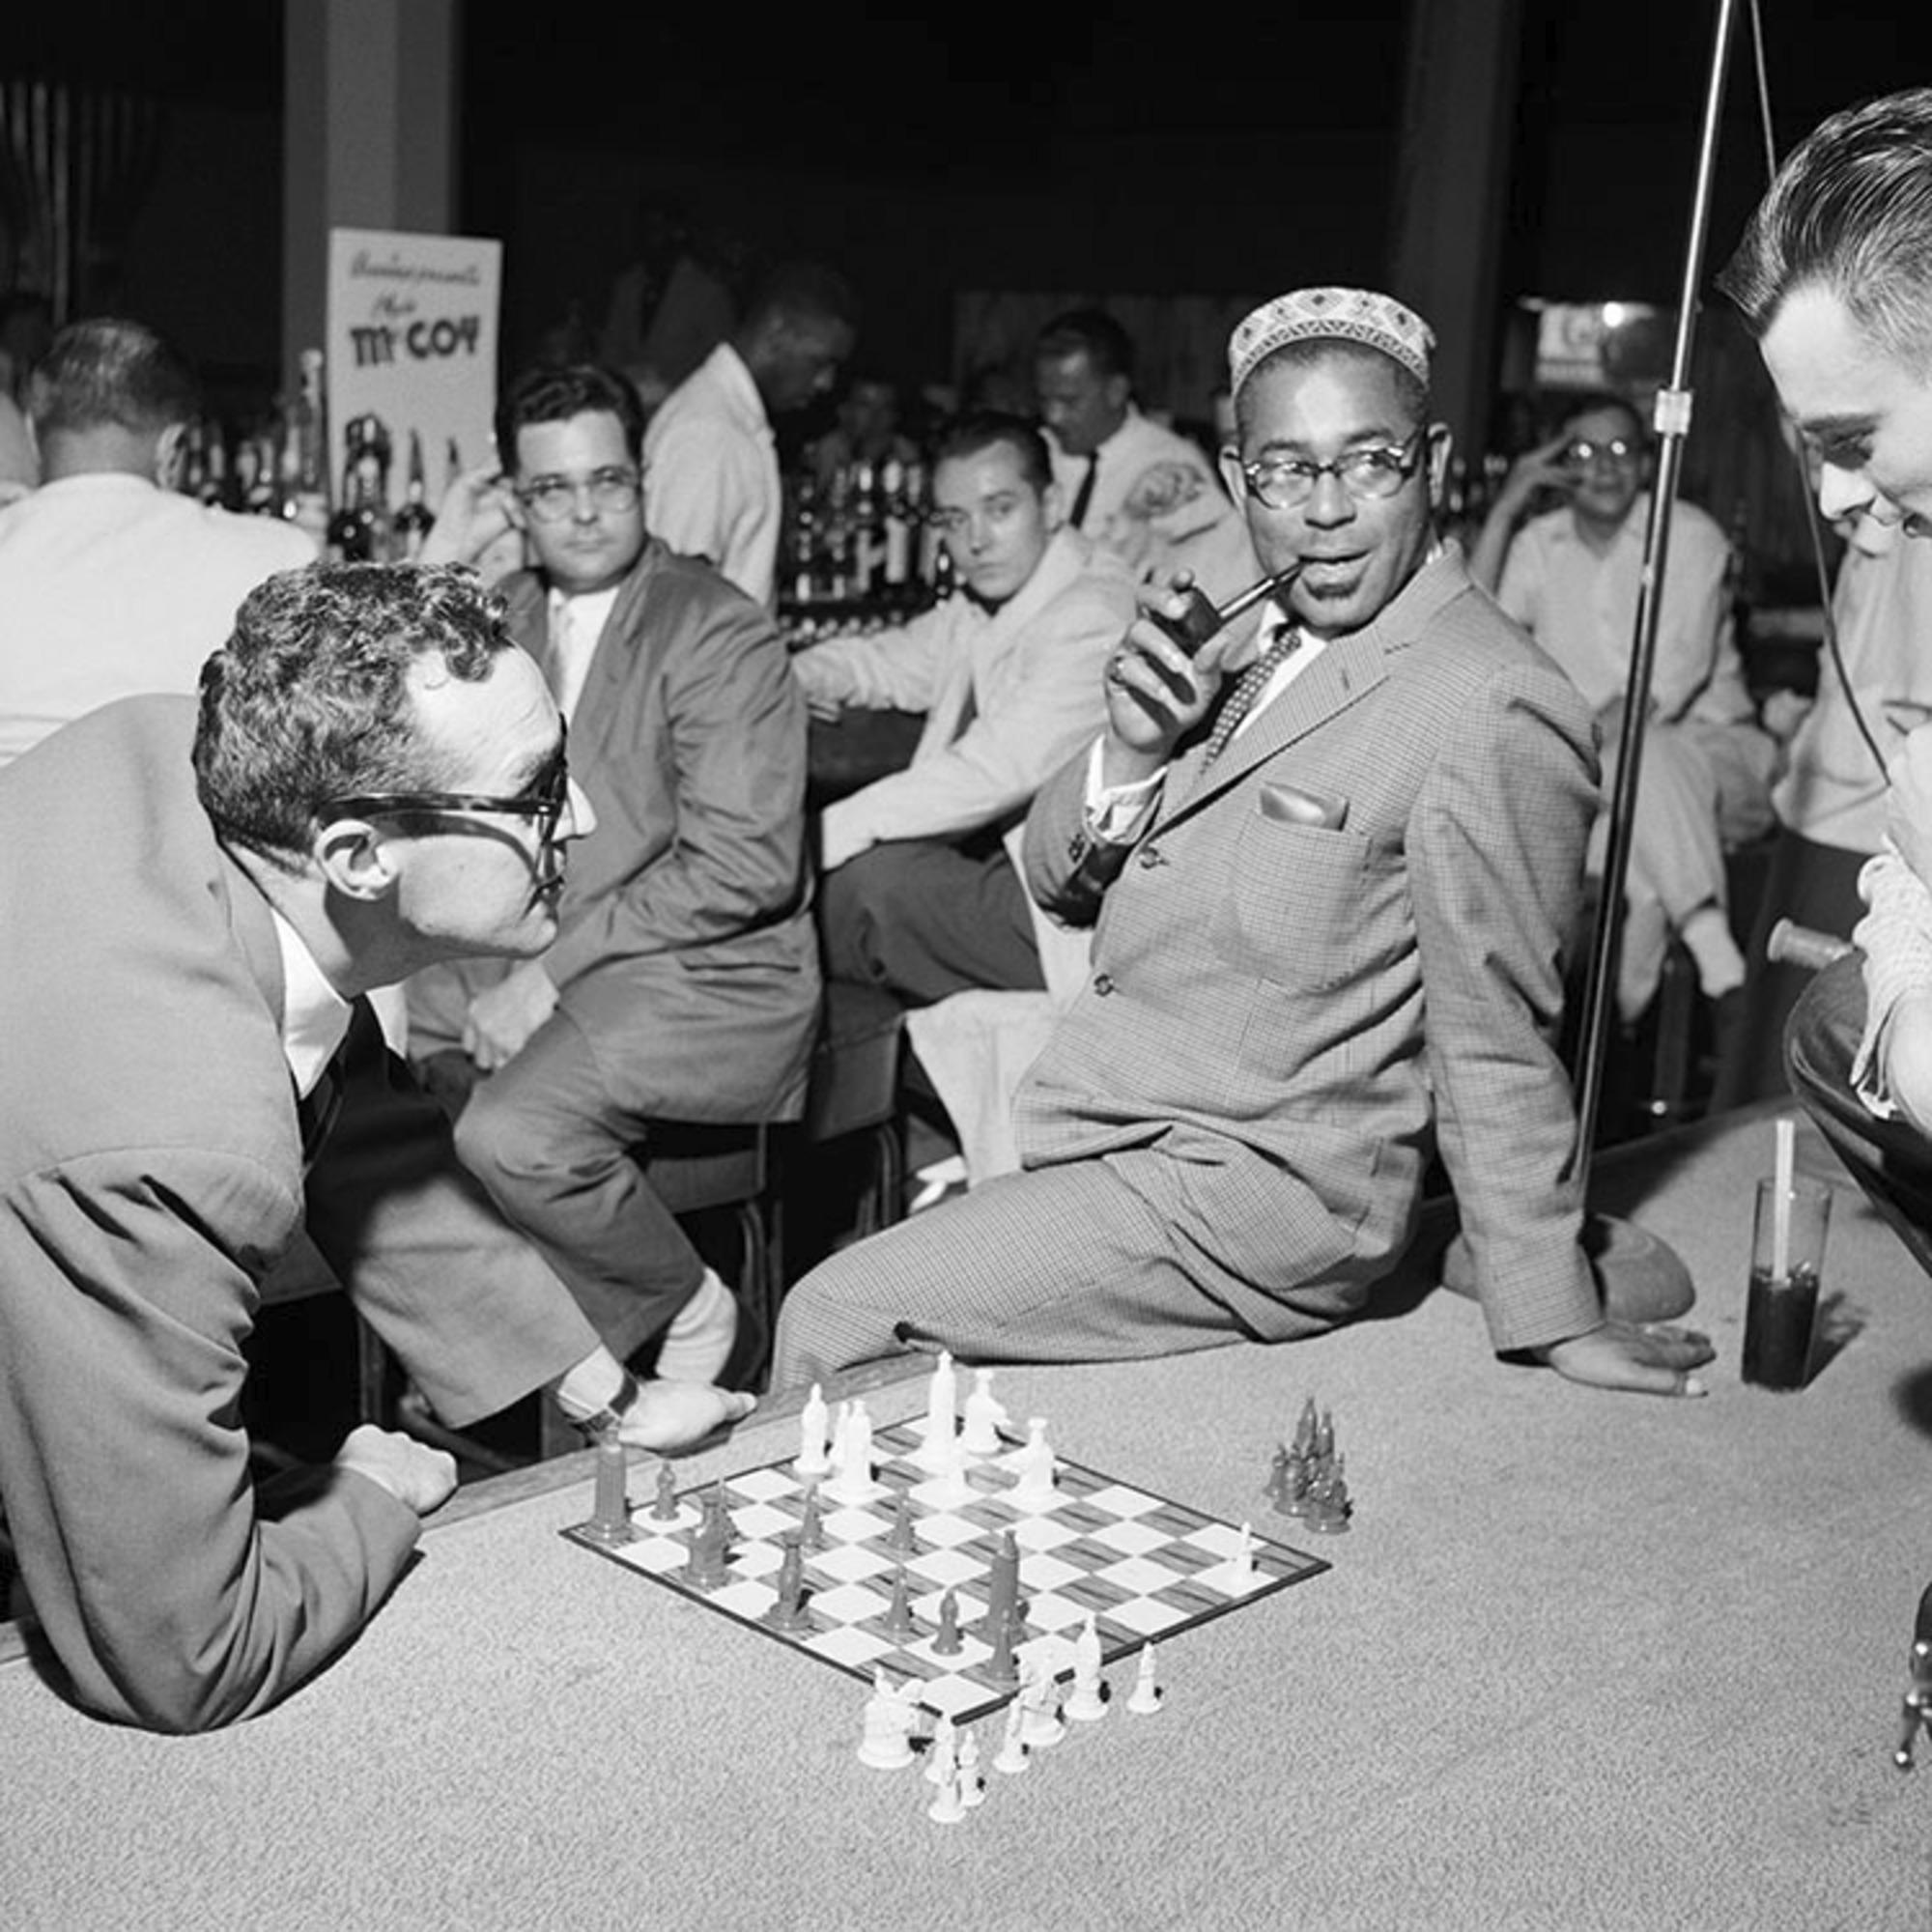 Estate-stamped, gelatin-print silver

Canadian music critic, biographer, lyricist and former journalist Gene Lees playing chess with American jazz trumpeter and bandleader, Dizzy Gillespie.

Available sizes: 
16”x20" Edition of 25
20”x24" Edition of